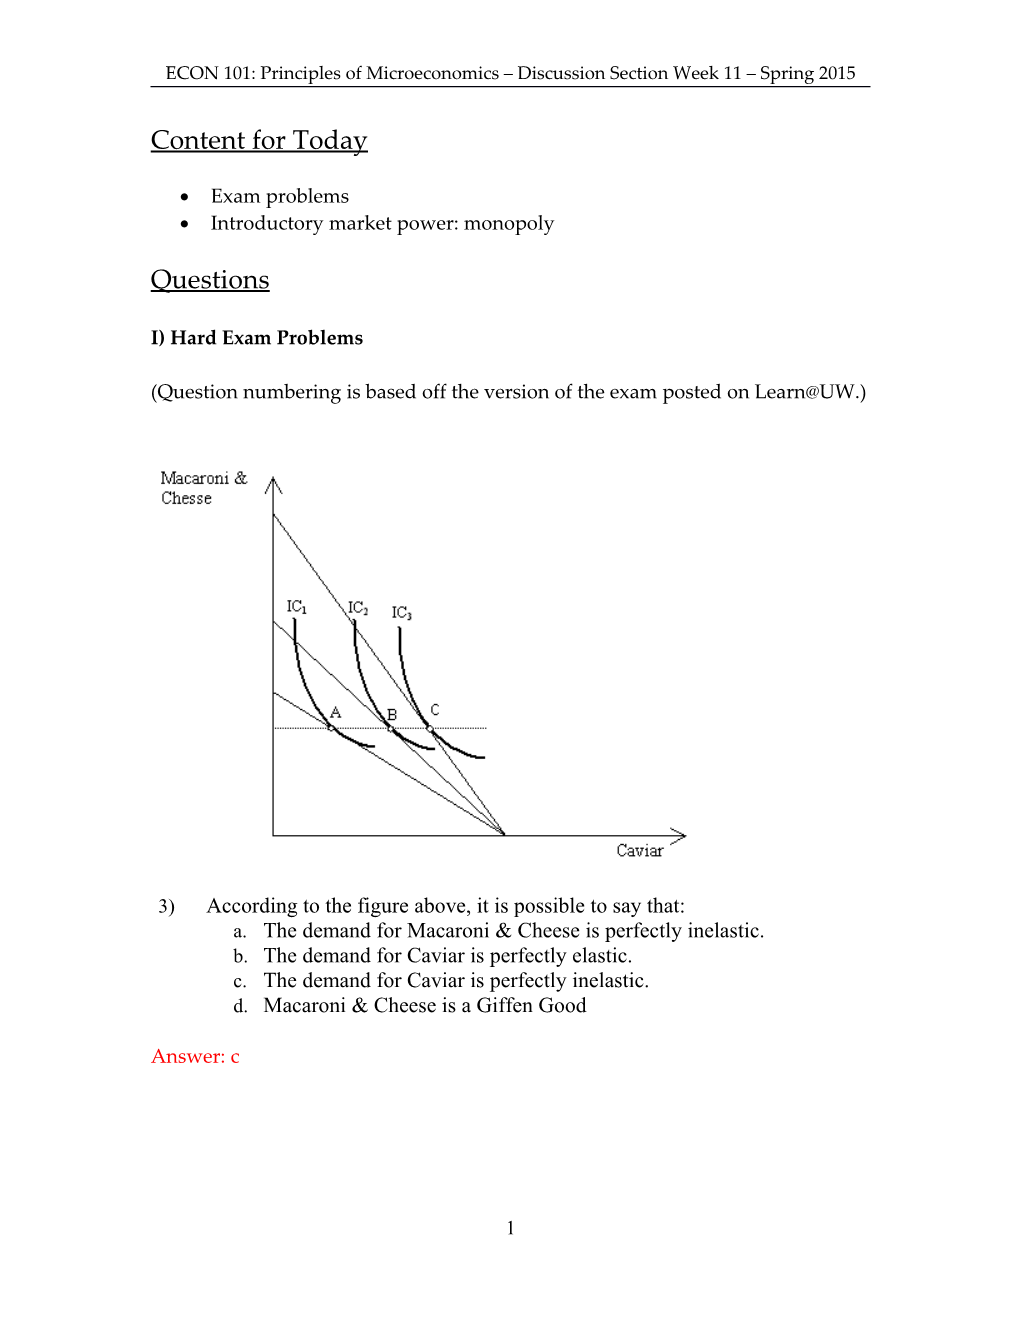 ECON 101: Principles of Microeconomics Discussion Section Week 11 Spring 2015